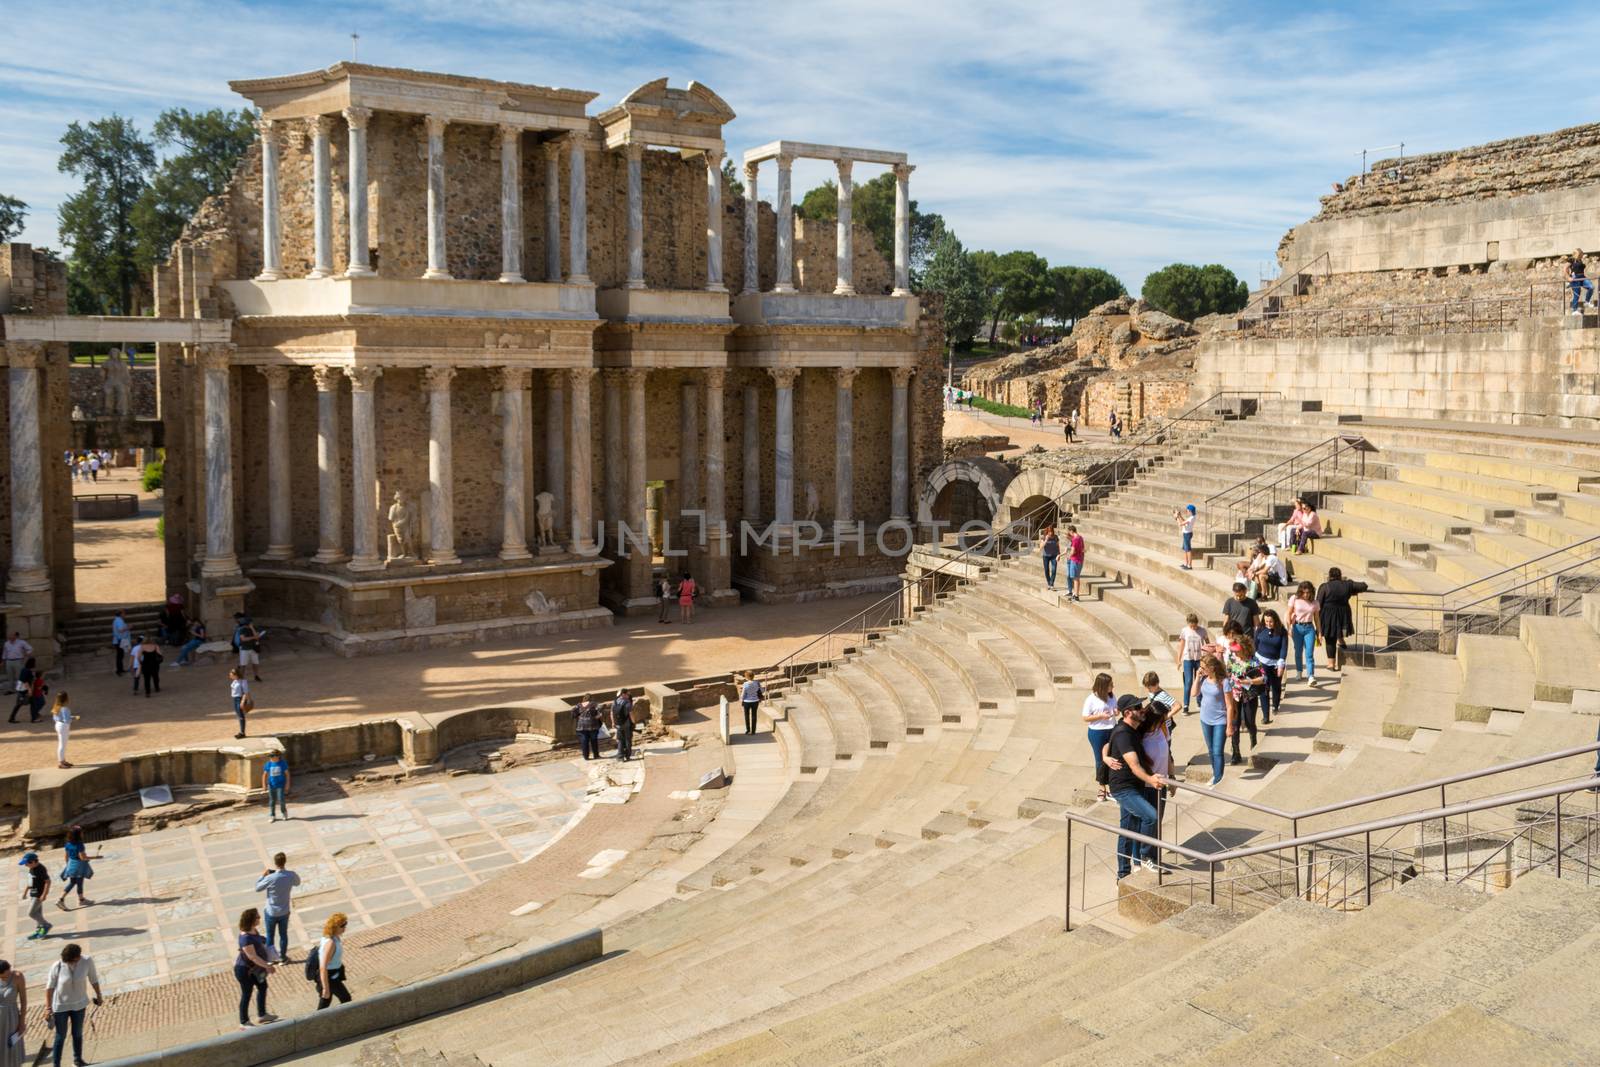 Merida, Spain, April 2017, tourists visiting the Roman ruins theatre arena & waiting rooms used for gladiator & animal fights. Travel and tourism.